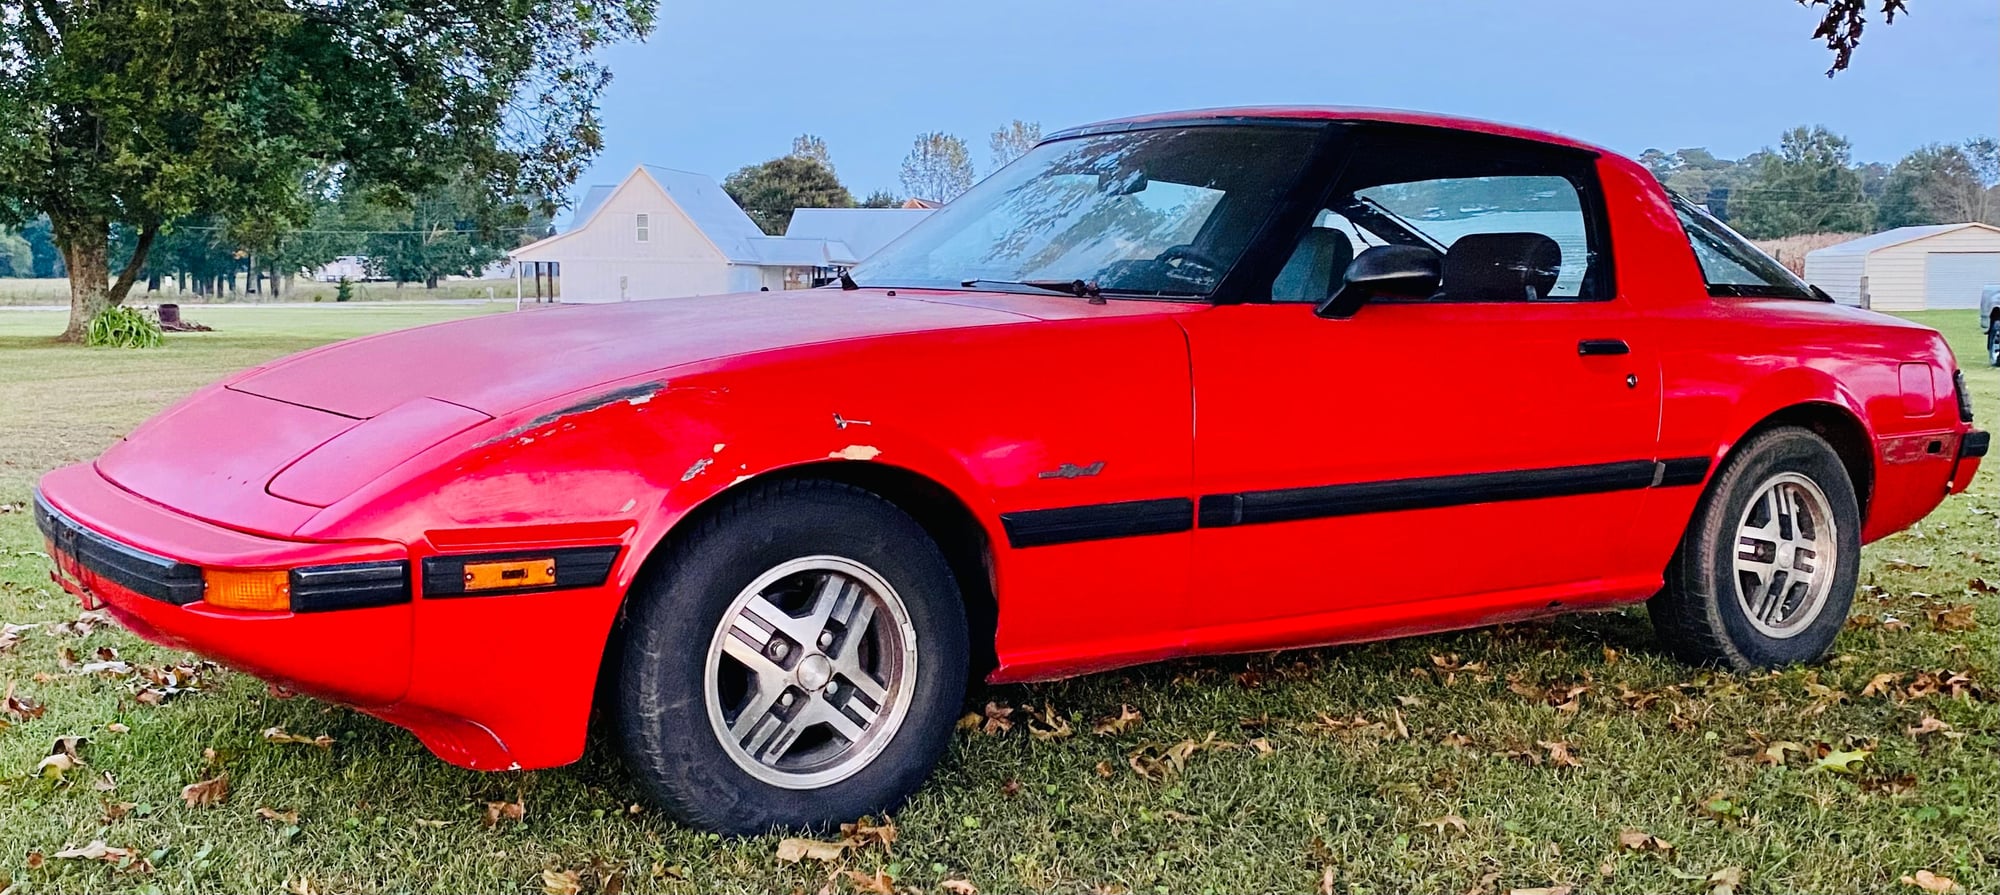 1985 Mazda RX-7 - 1985 rx-7 gs - Used - VIN JM1FB331XF0886122 - 211,978 Miles - Manual - Coupe - Red - Athens, AL 35614, United States